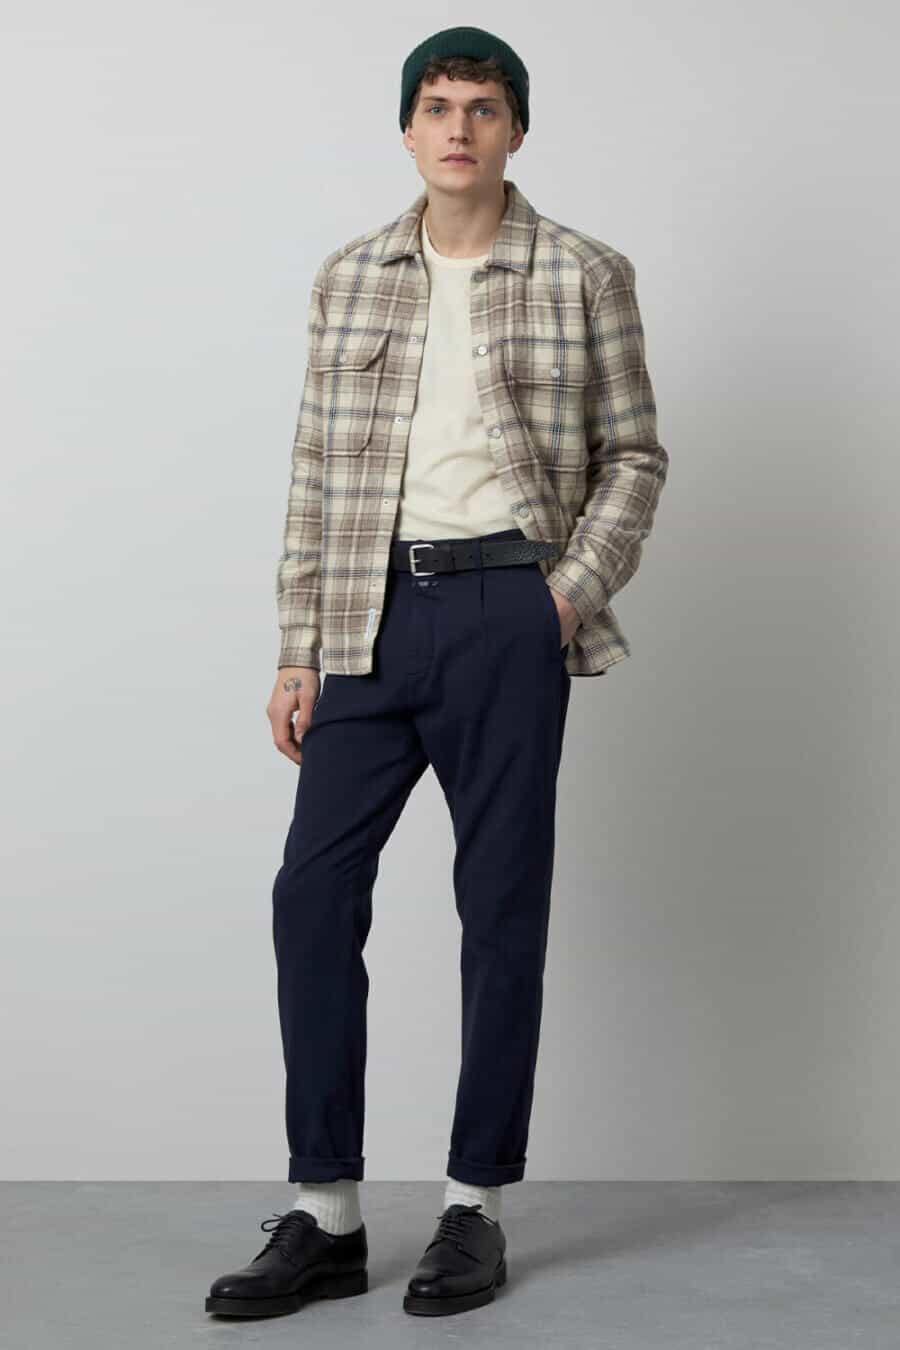 Men's punk flannel shirt outfit with jeans and chunky shoes